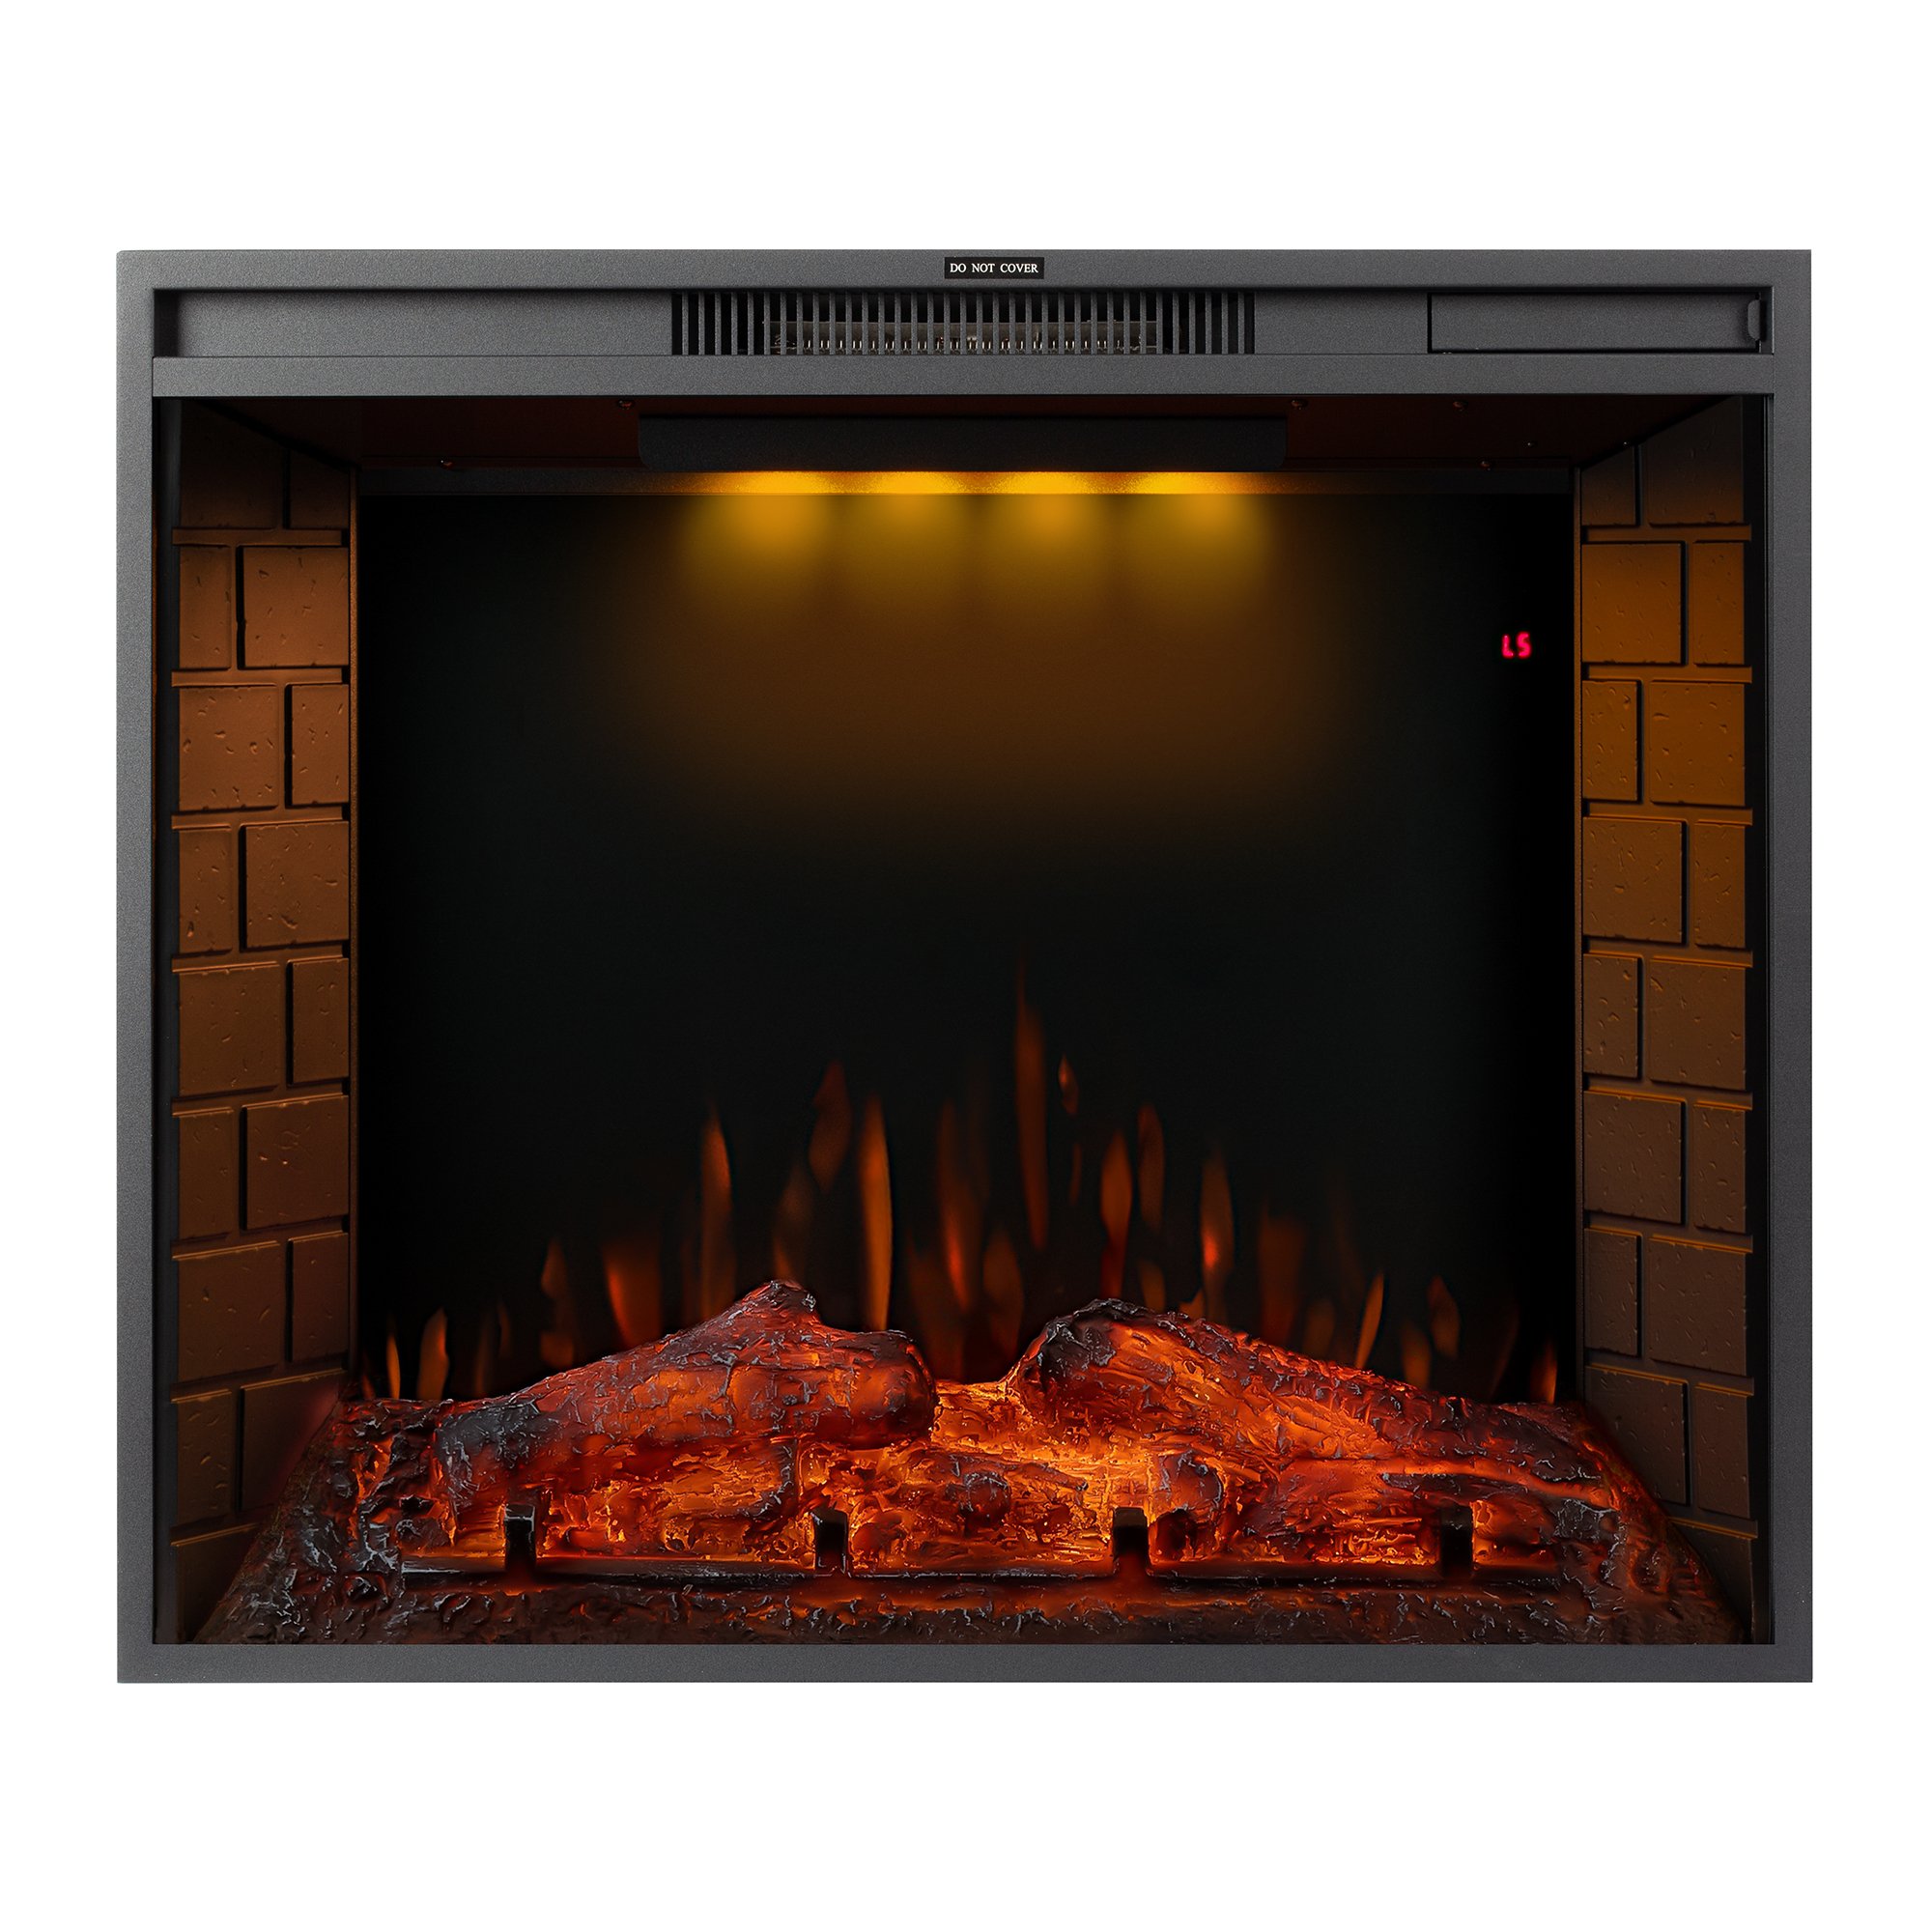 30 inch LED Recessed Electric Fireplace with 3 Top Light Colors, Remote Control and Touch Screen 1500W, Black-CASAINC